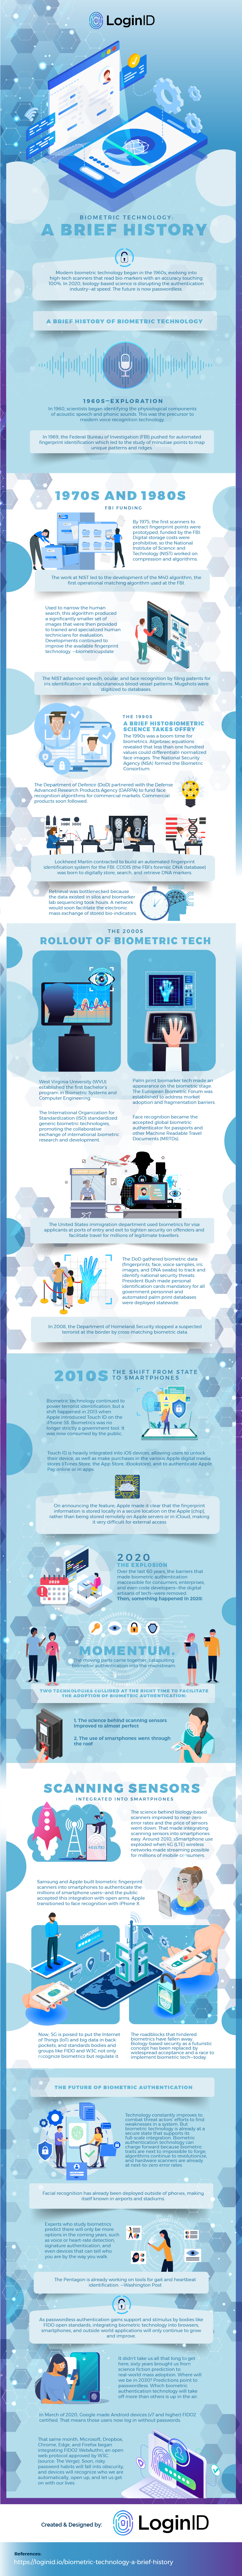 Biometric Technology - Infographic ImageDNAND1415